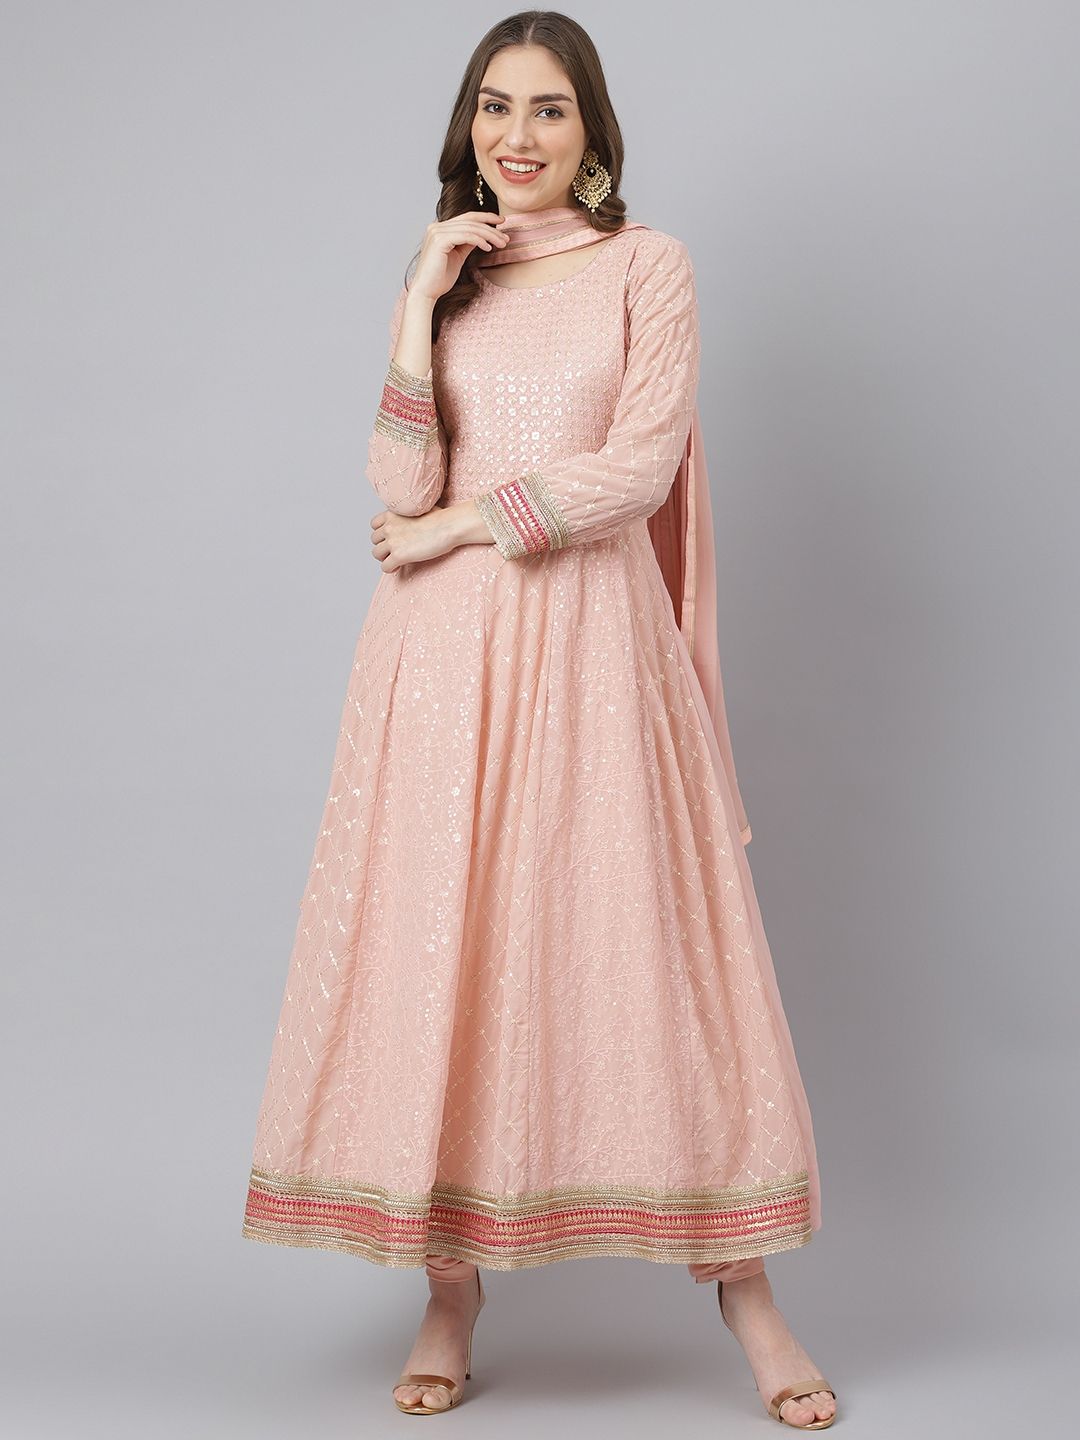 Readiprint Fashions Women Peach-Coloured Embroidered Semi-Stitched Dress Material Price in India